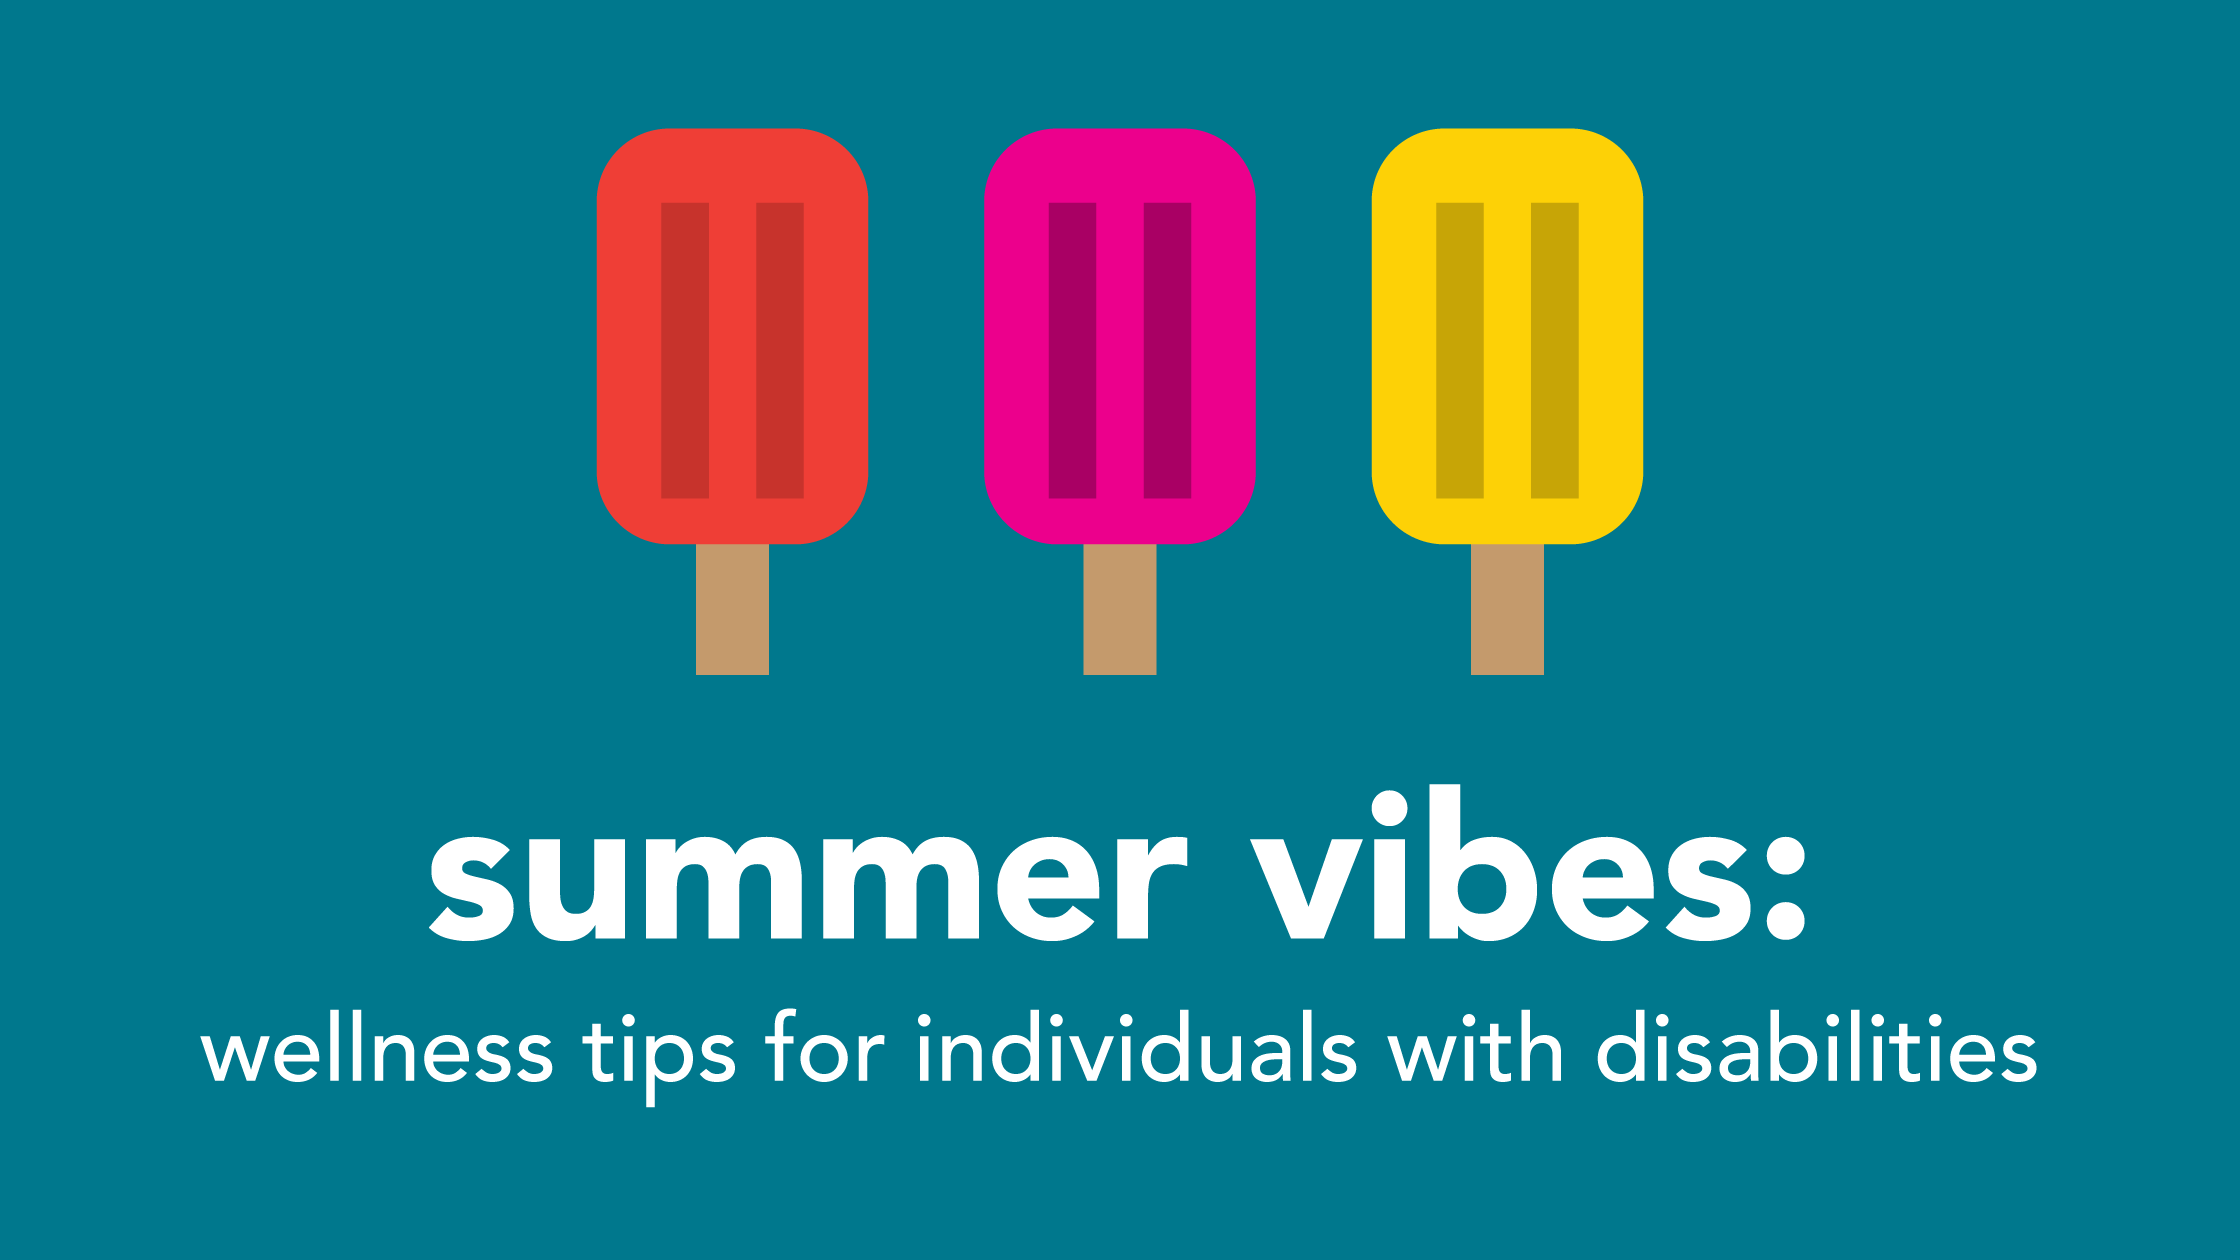 Summer Vibes: Wellness Tips for Individuals with Disabilities